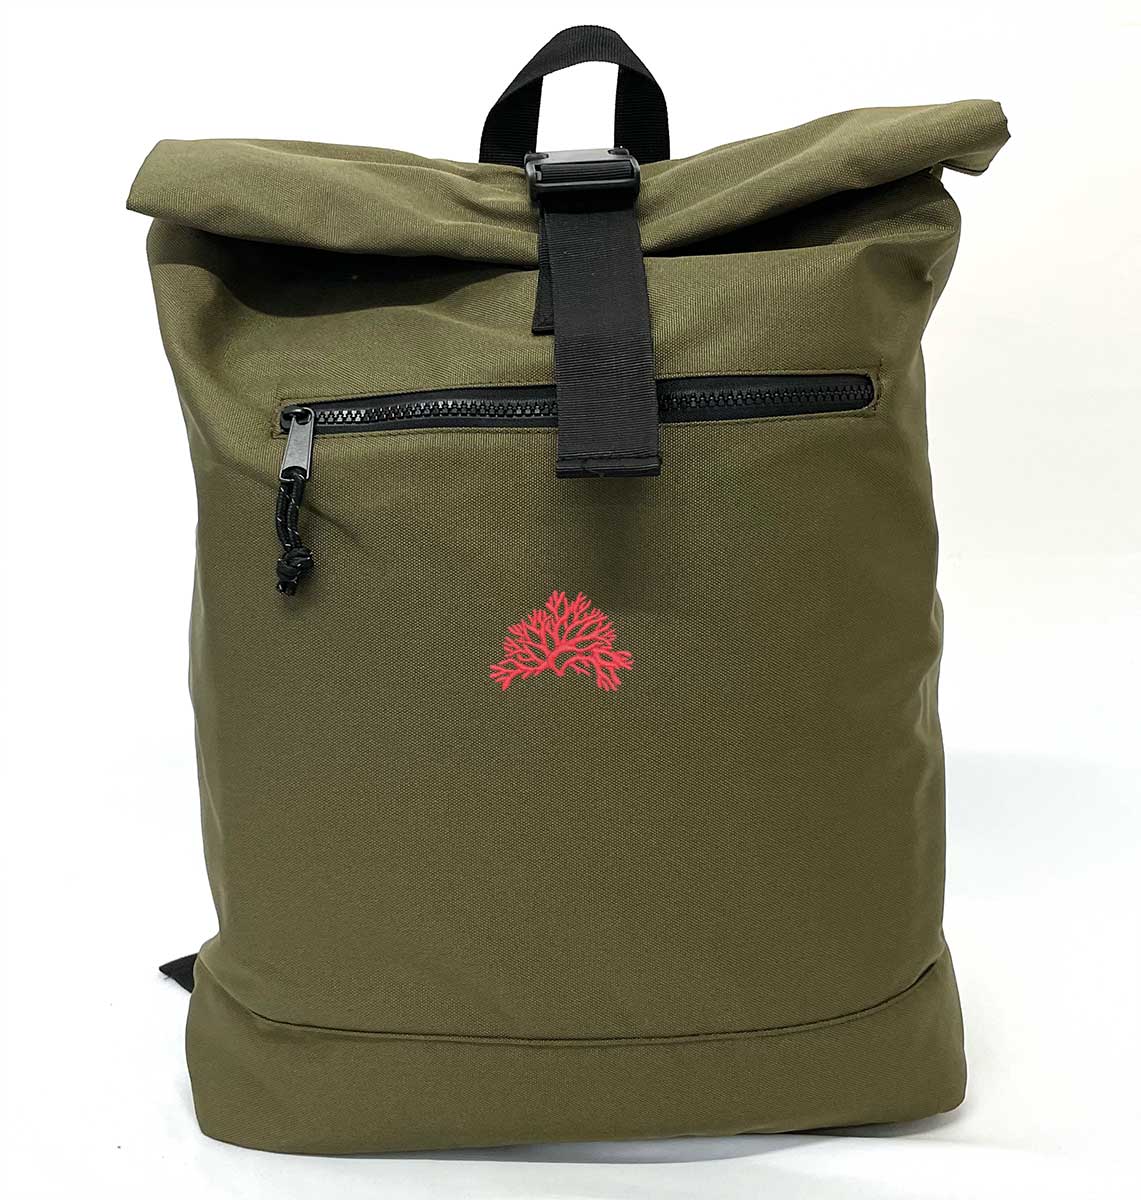 Coral Beach Roll-top Recycled Backpack - Blue Panda